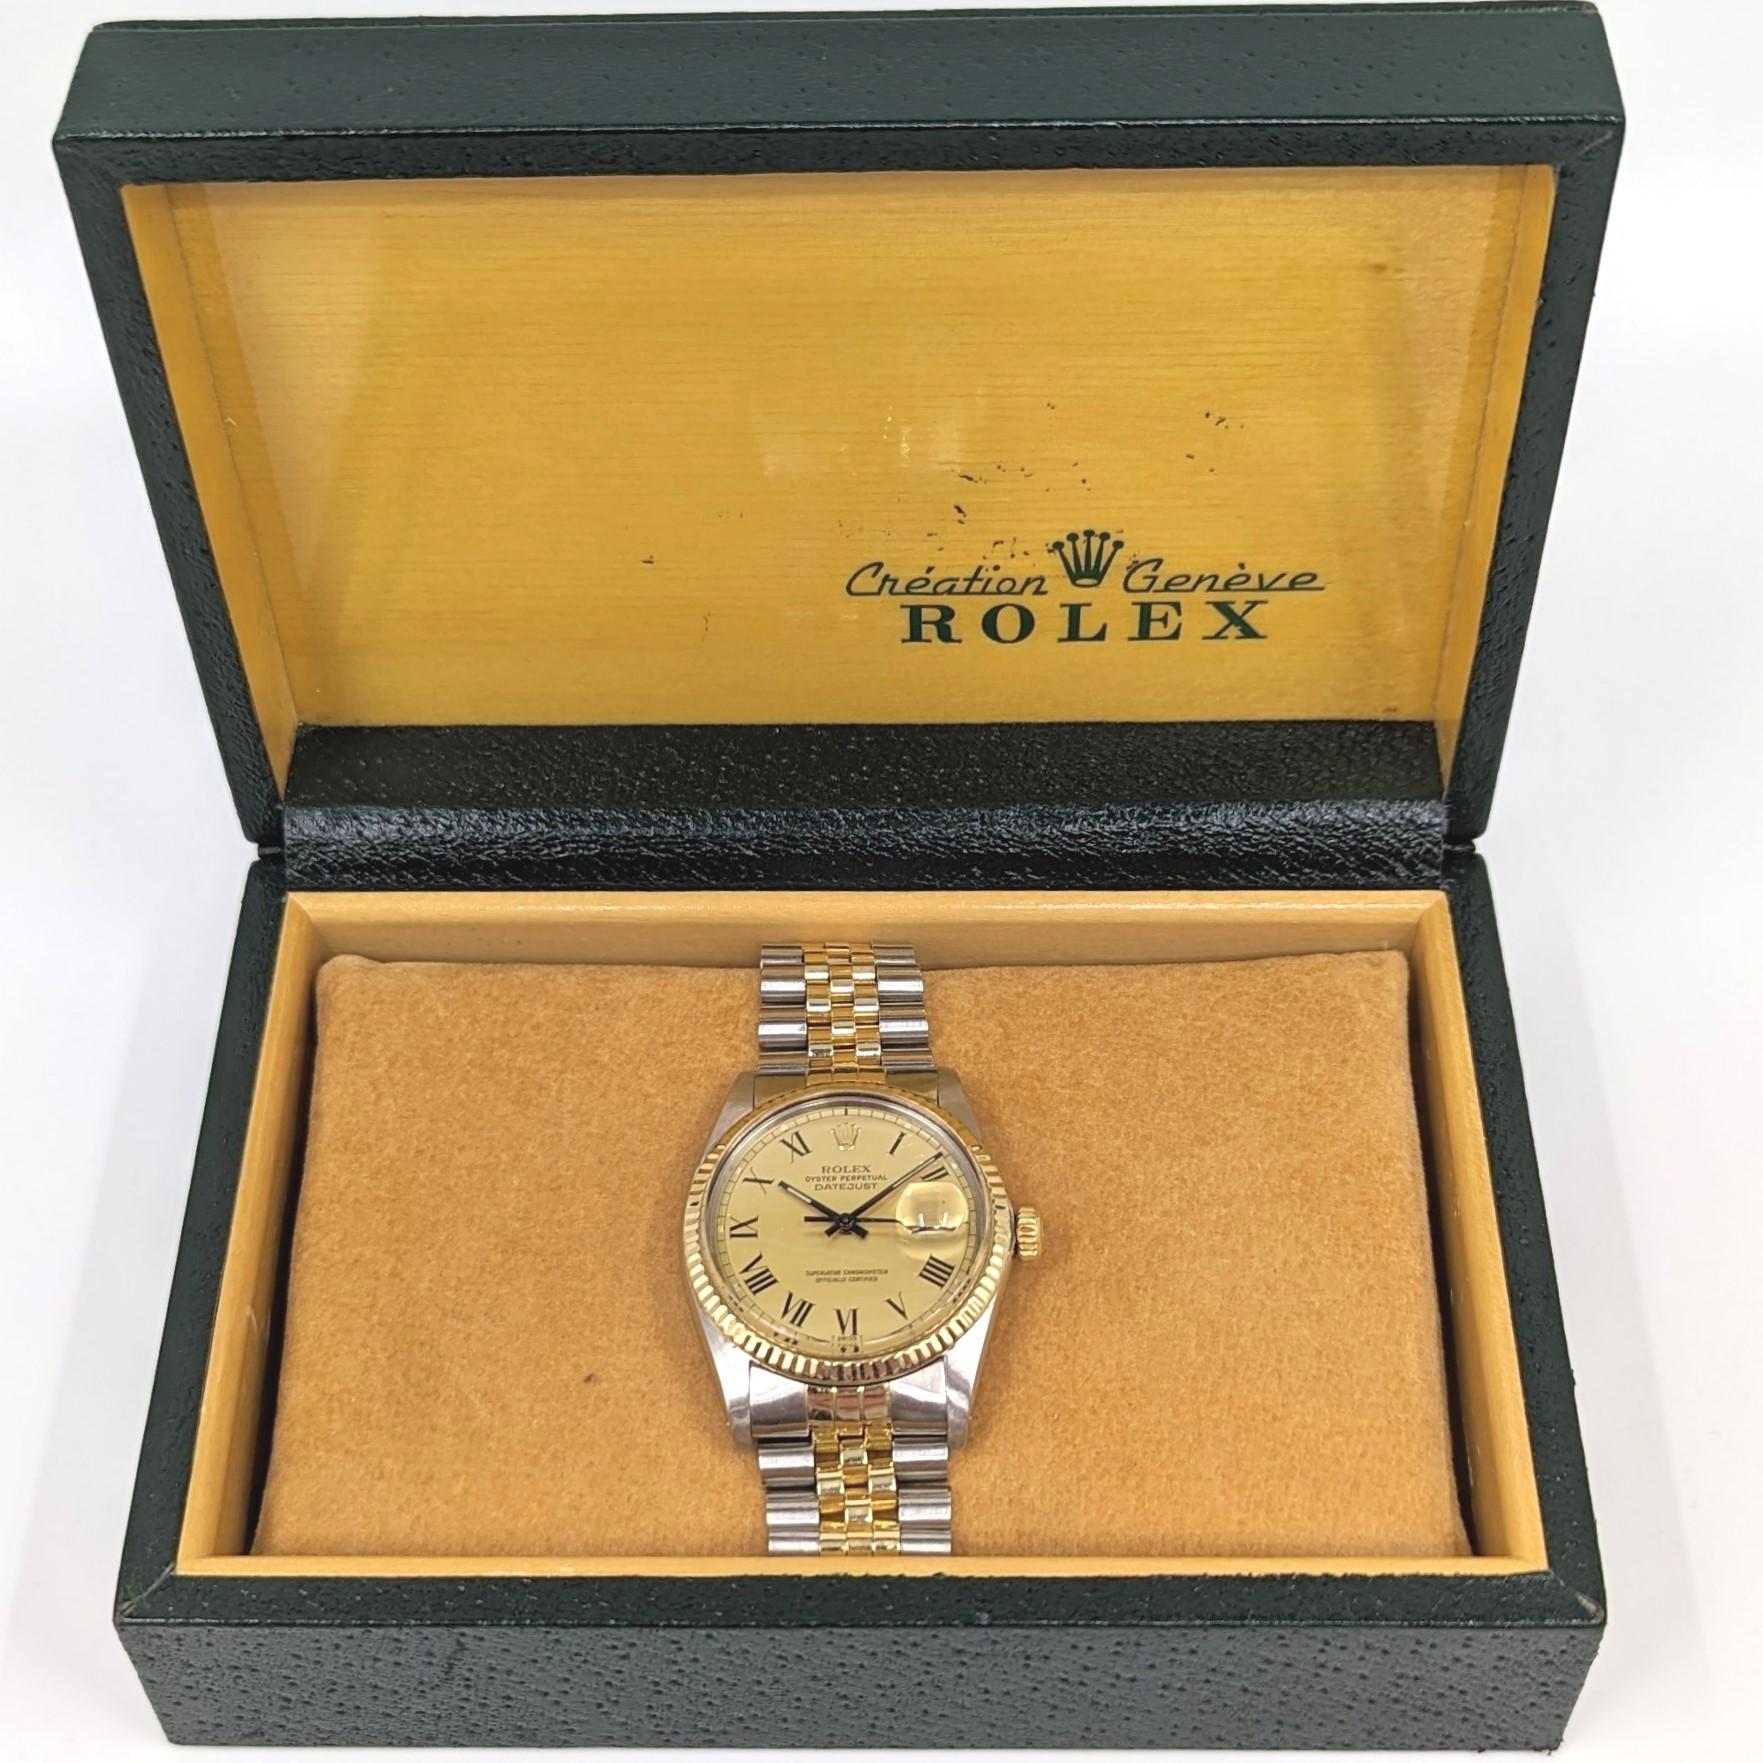 Rolex Oyster Perpetual Datejust 18k/SS YG 2tone Watch Collectible Buckley 16013 en vente 5